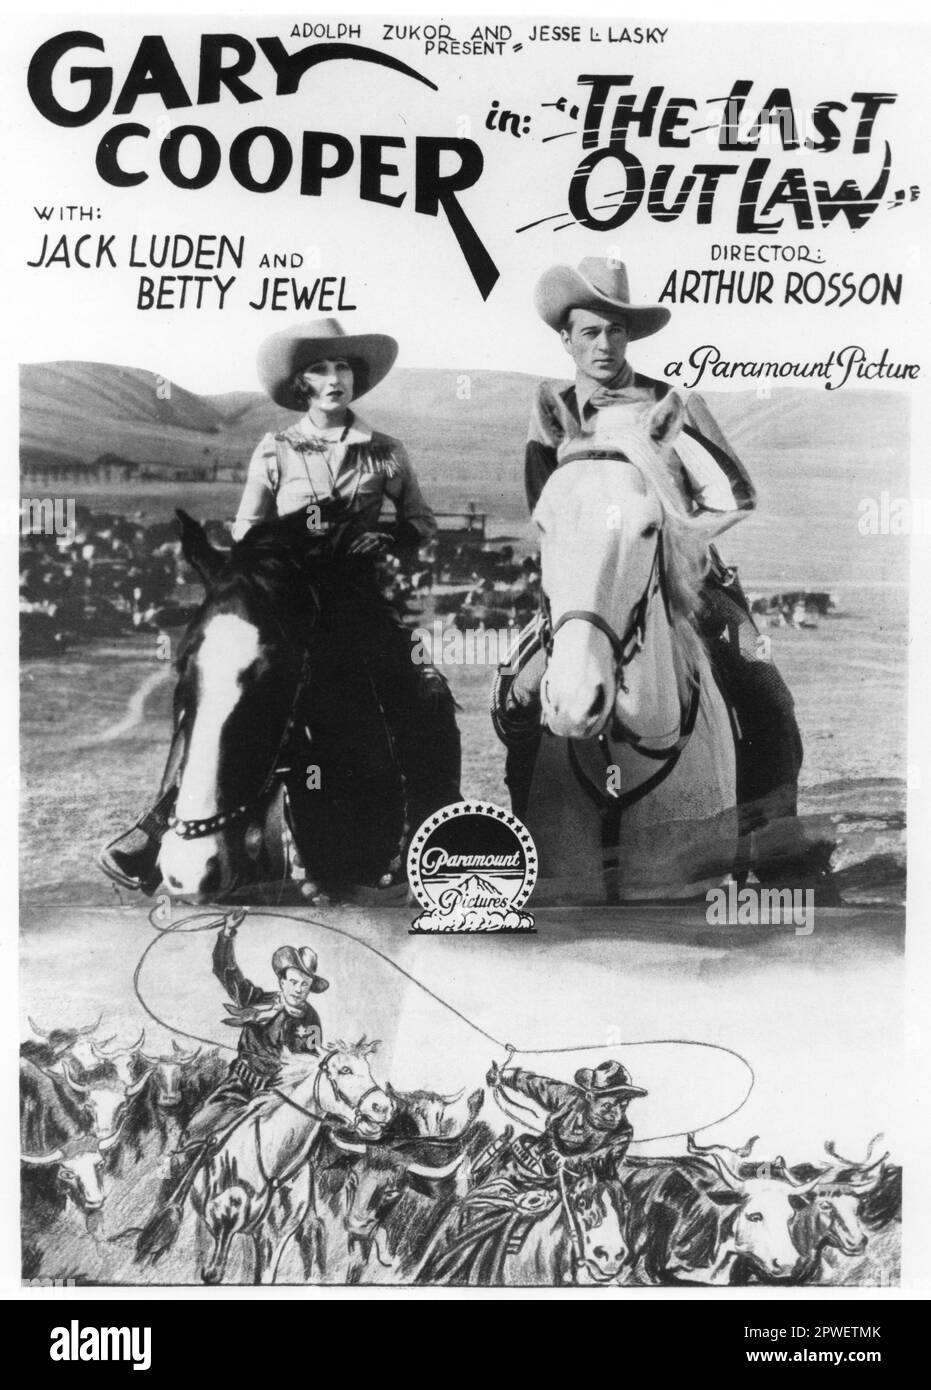 Poster Art of GARY COOPER and BETTY JEWEL for the Silent Western THE LAST OUTLAW 1927 Director ARTHUR ROSSON Paramount Pictures Stock Photo